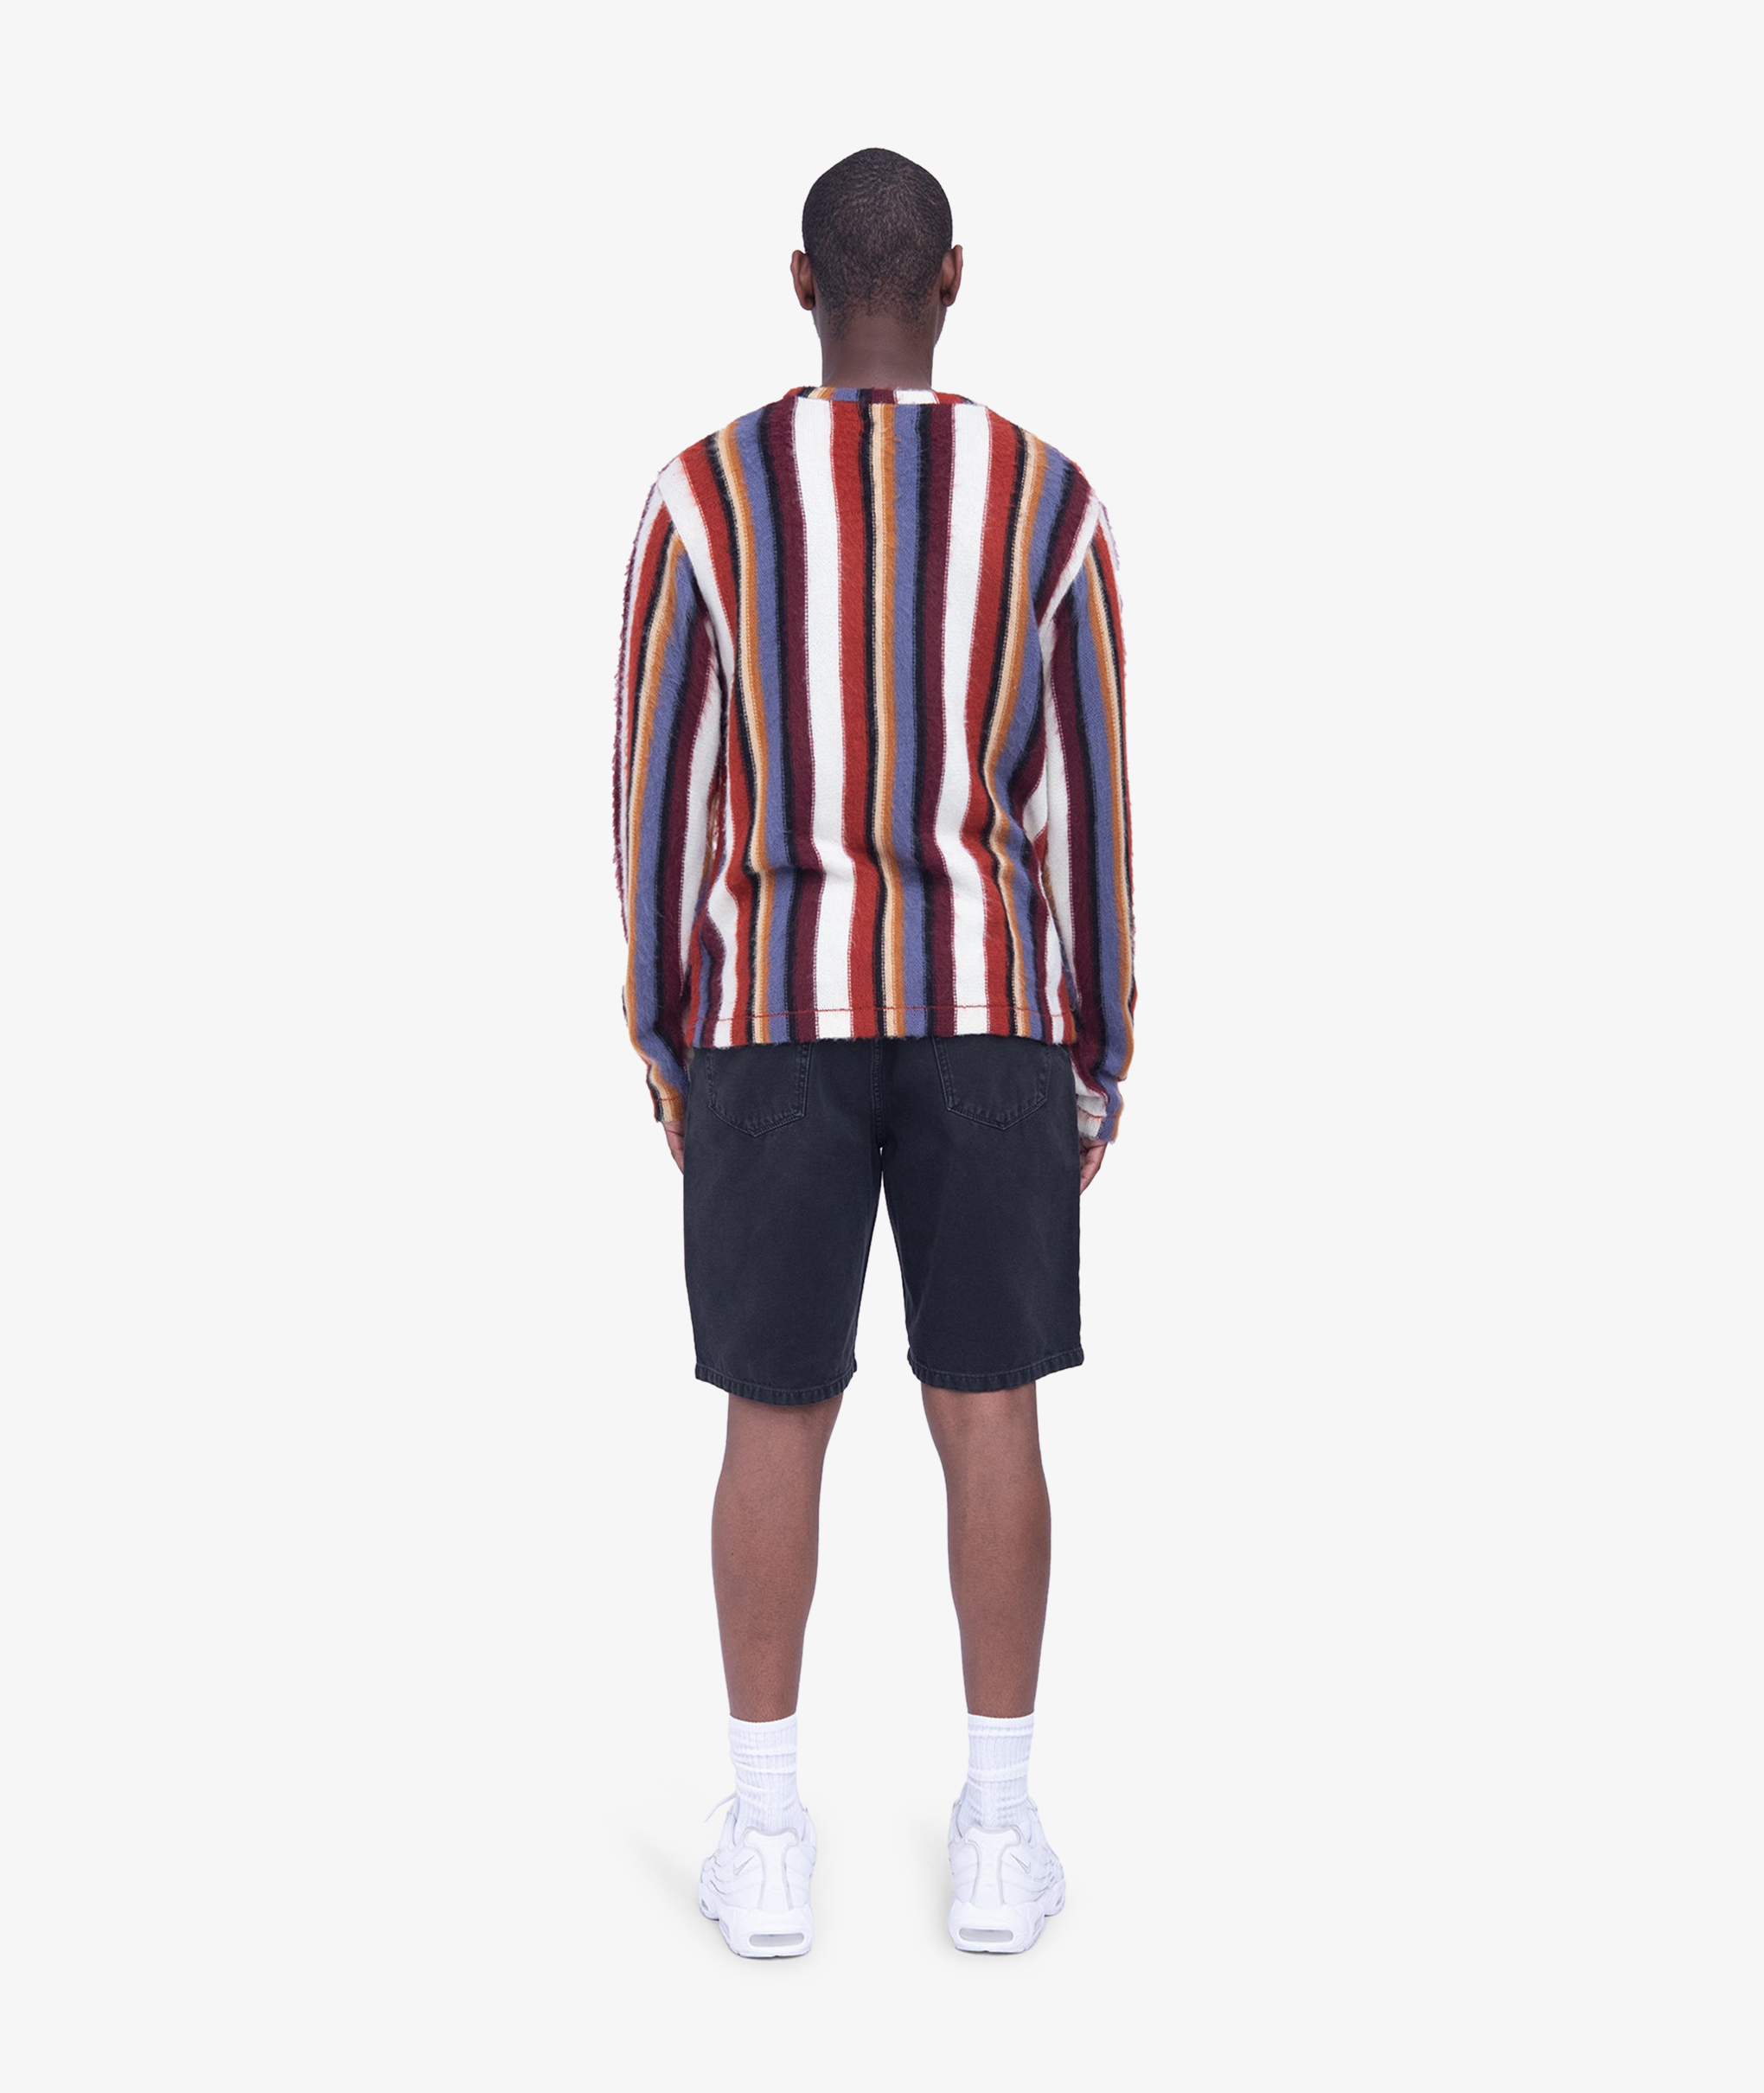 Norse Store | Shipping Worldwide - Stussy Verical Stripe sweater